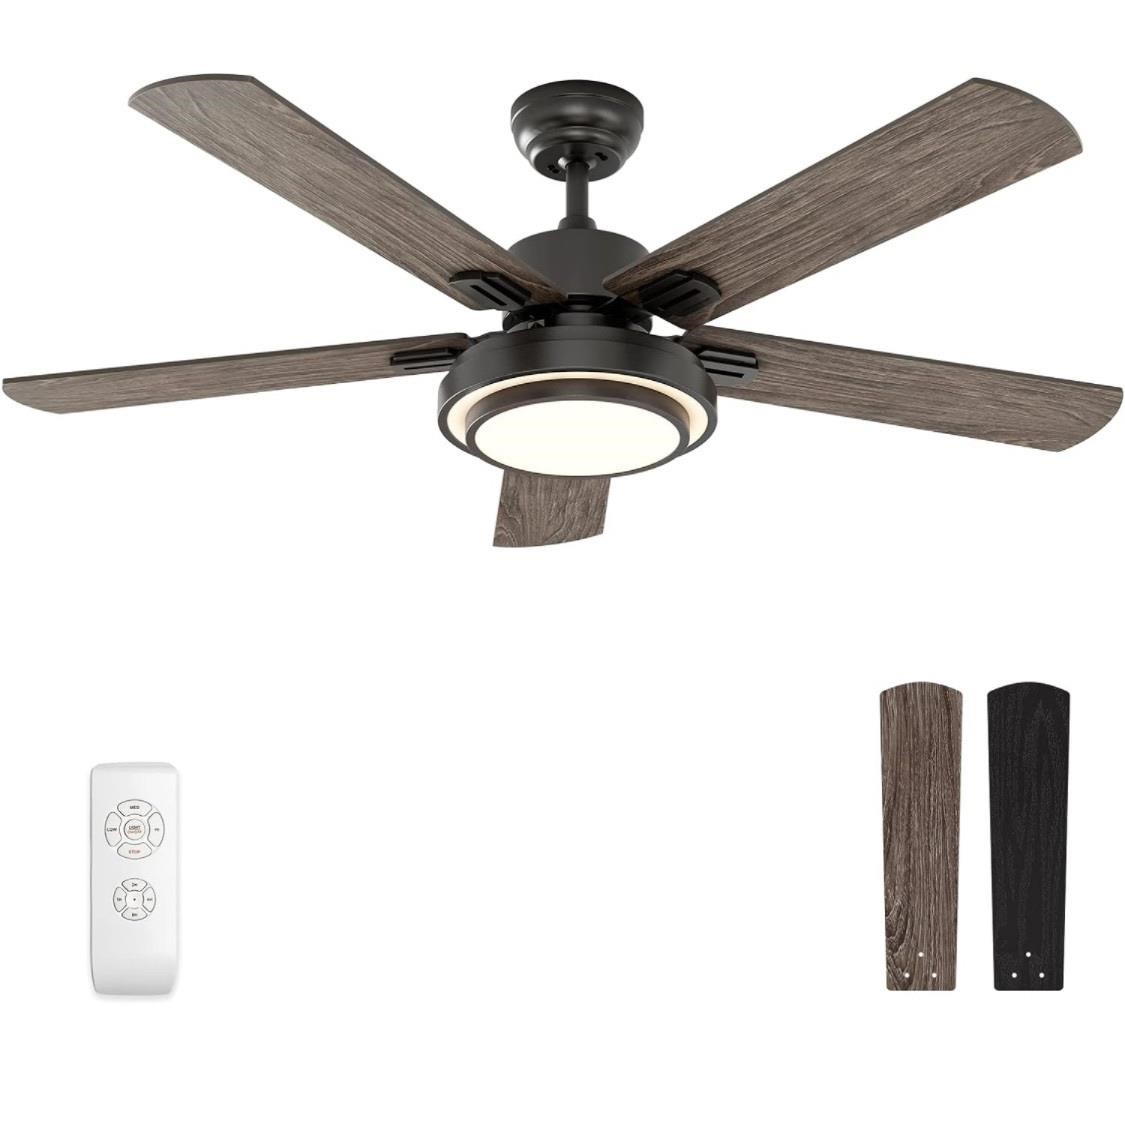 $120 warmiplanet Ceiling Fan with Lights Remote